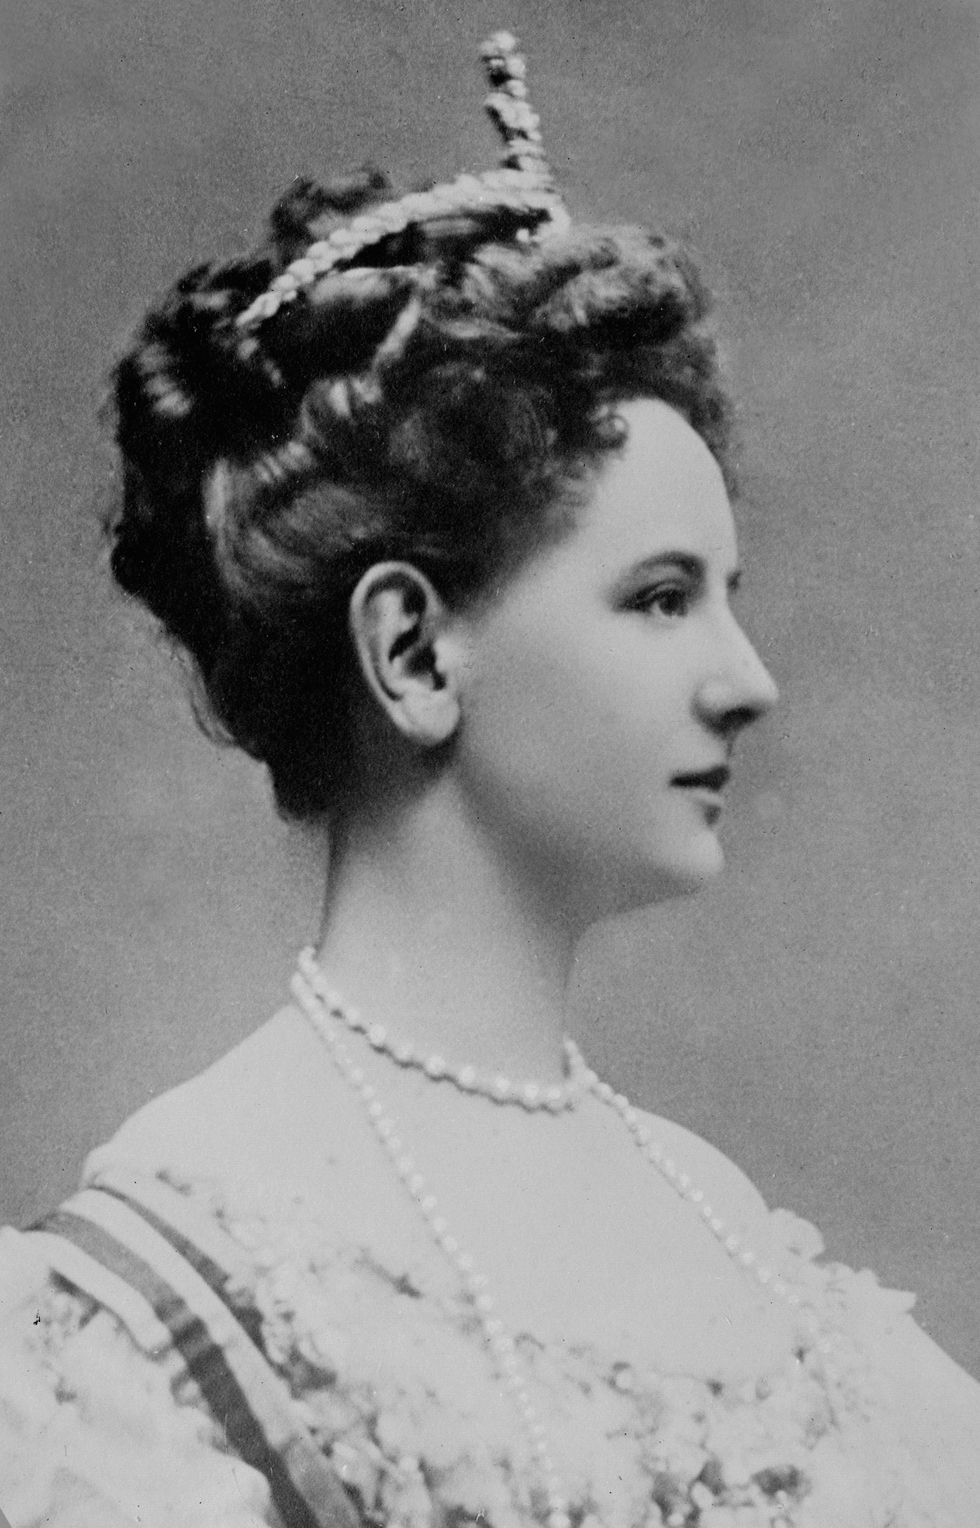 unspecified   circa 1754 wilhelmina wilhelmina helena pauline maria 1880 1962 queen regnant of the kingdom of the netherlands from 1890 1948 head and shoulders photographic portrait of a young queen wilhelmina royalty dutch photo by universal history archivegetty images